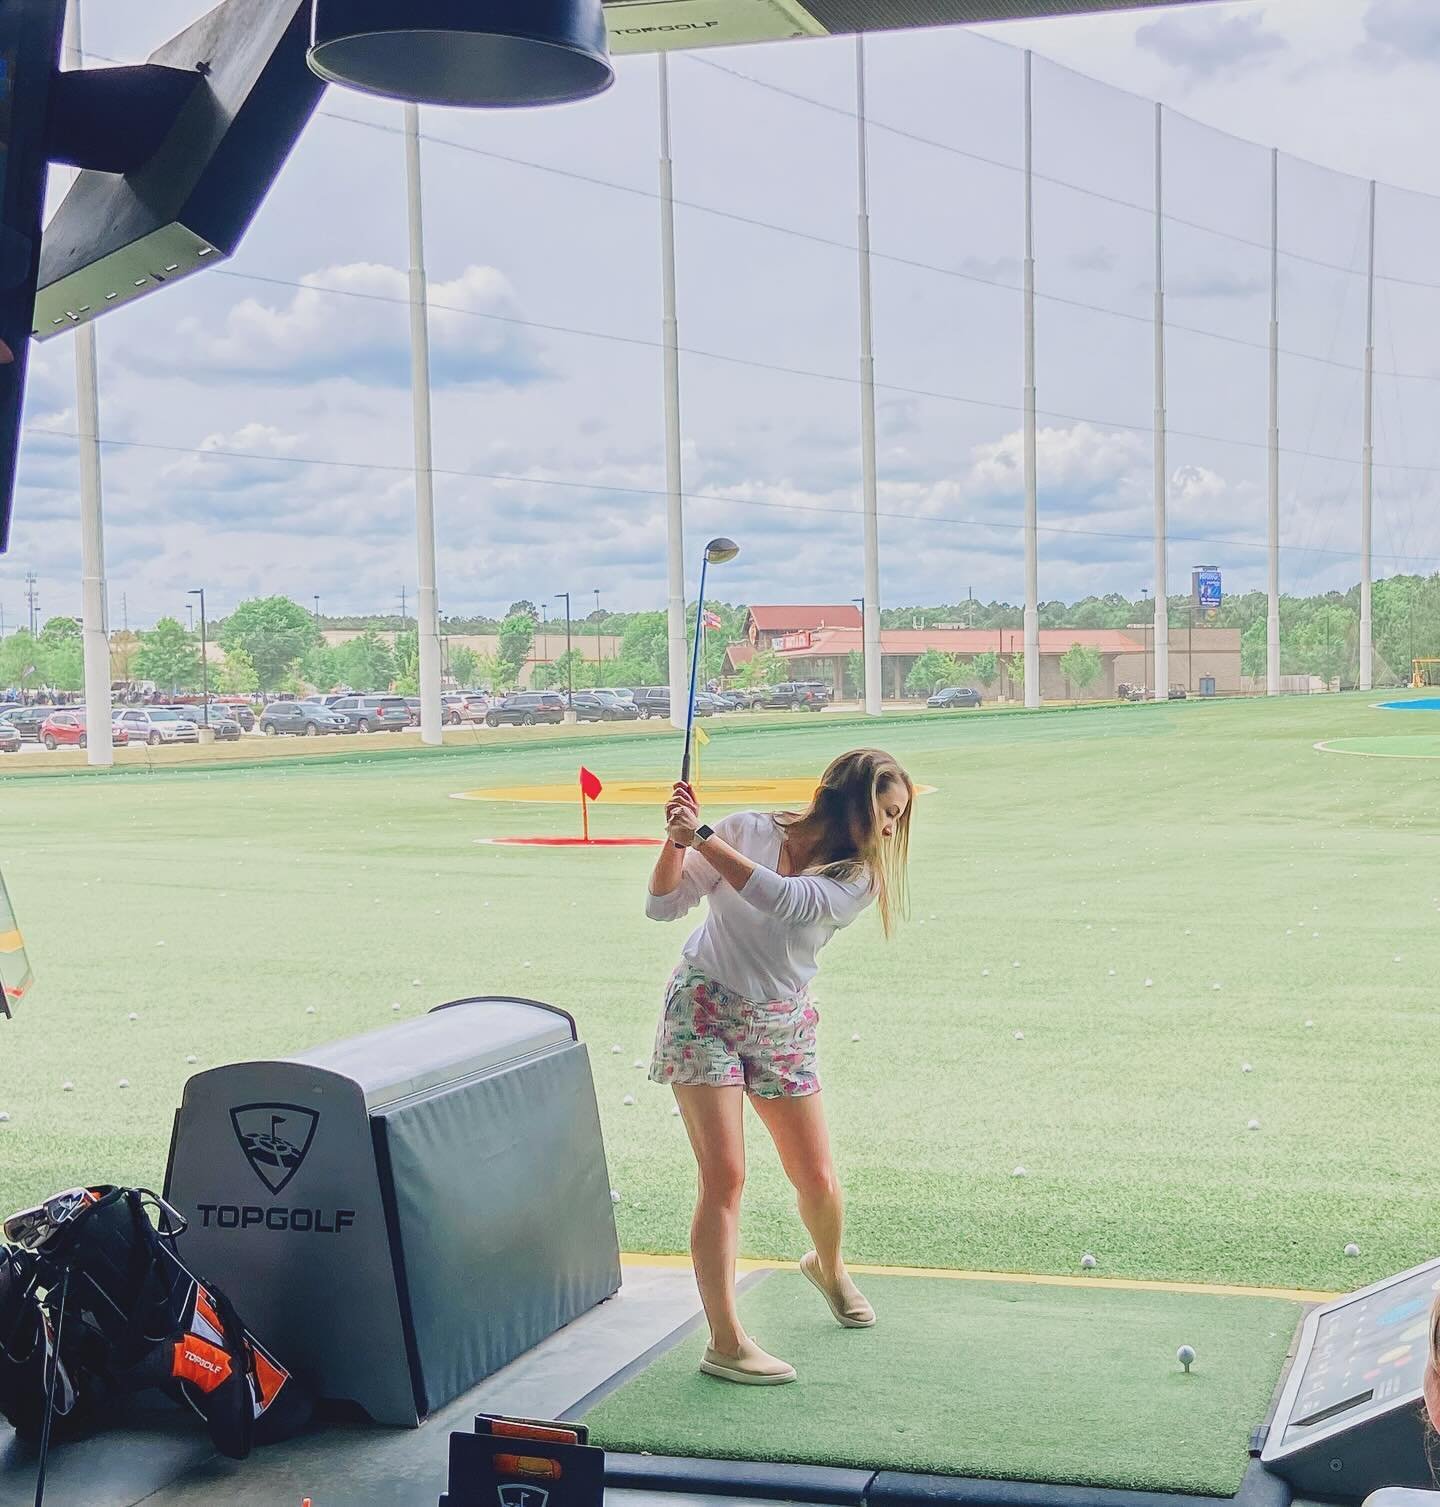 New hobby unlocked this weekend 😆 Had no idea my husband was taking these 🙈 or that I would love this so much! Can&rsquo;t wait to go to the driving range soon! ⛳️